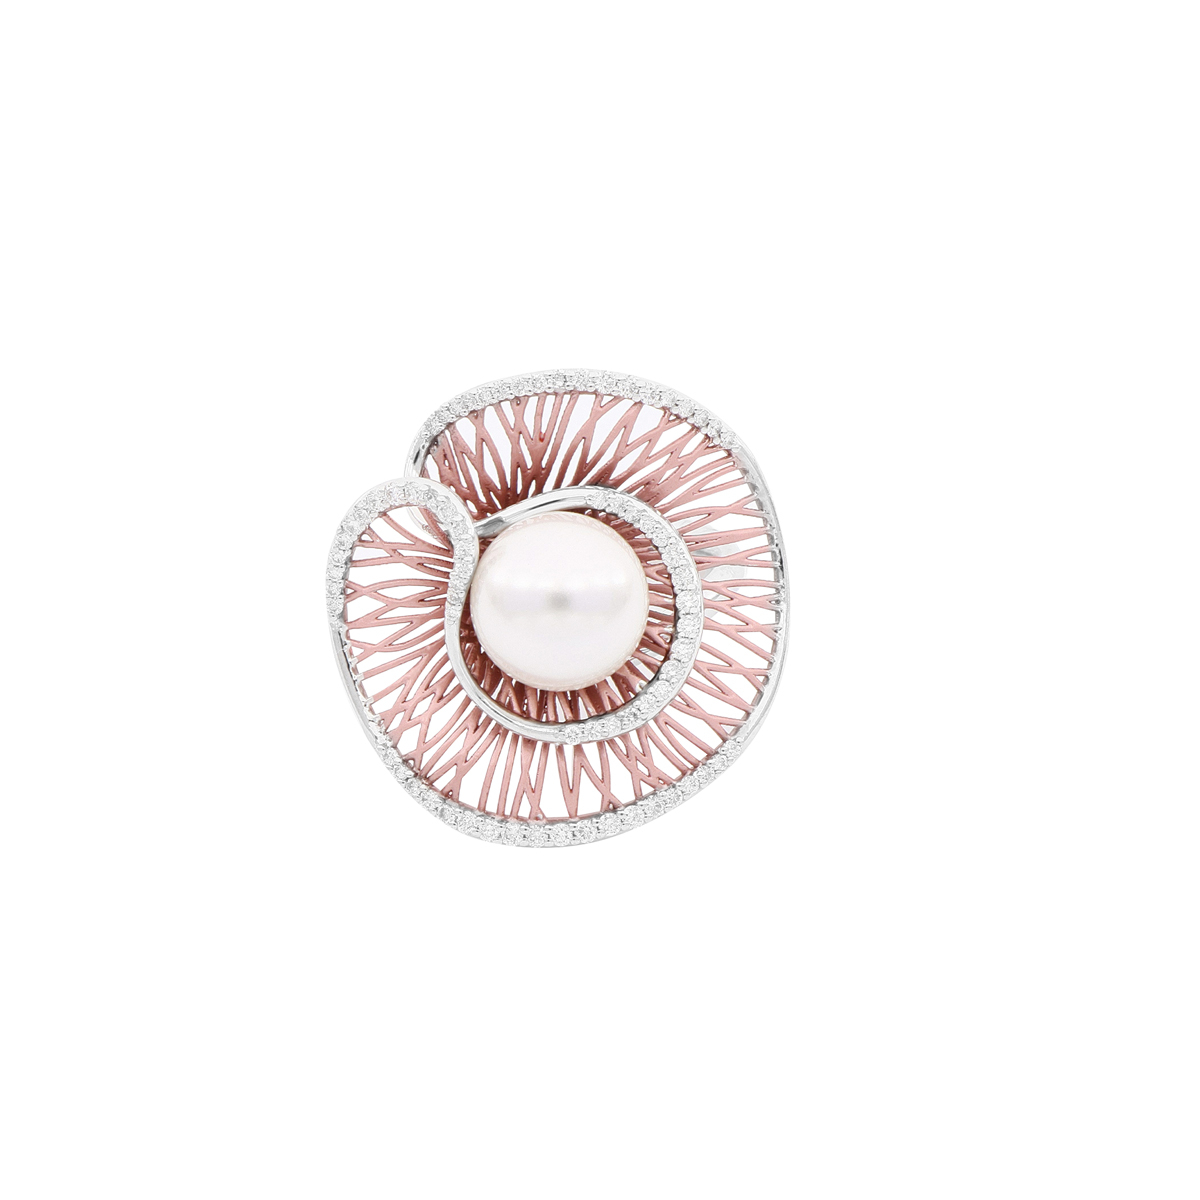 Modern 18 Kt White Gold Pearl Ring with Diamonds